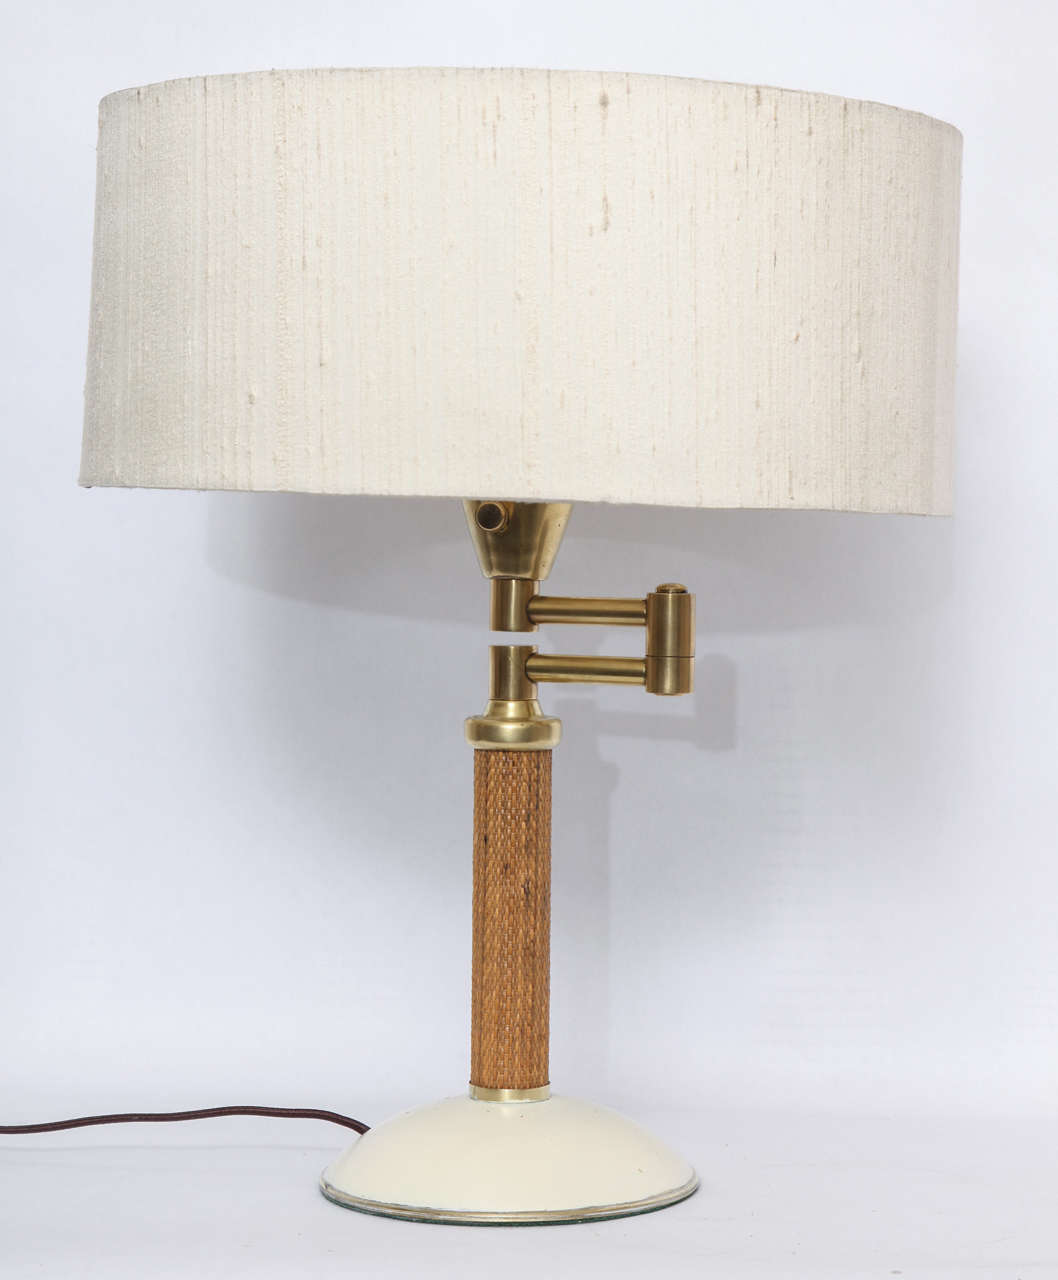  Kurt Versen Table Lamp Articulated American Modernist 1930's
New sockets and rewired